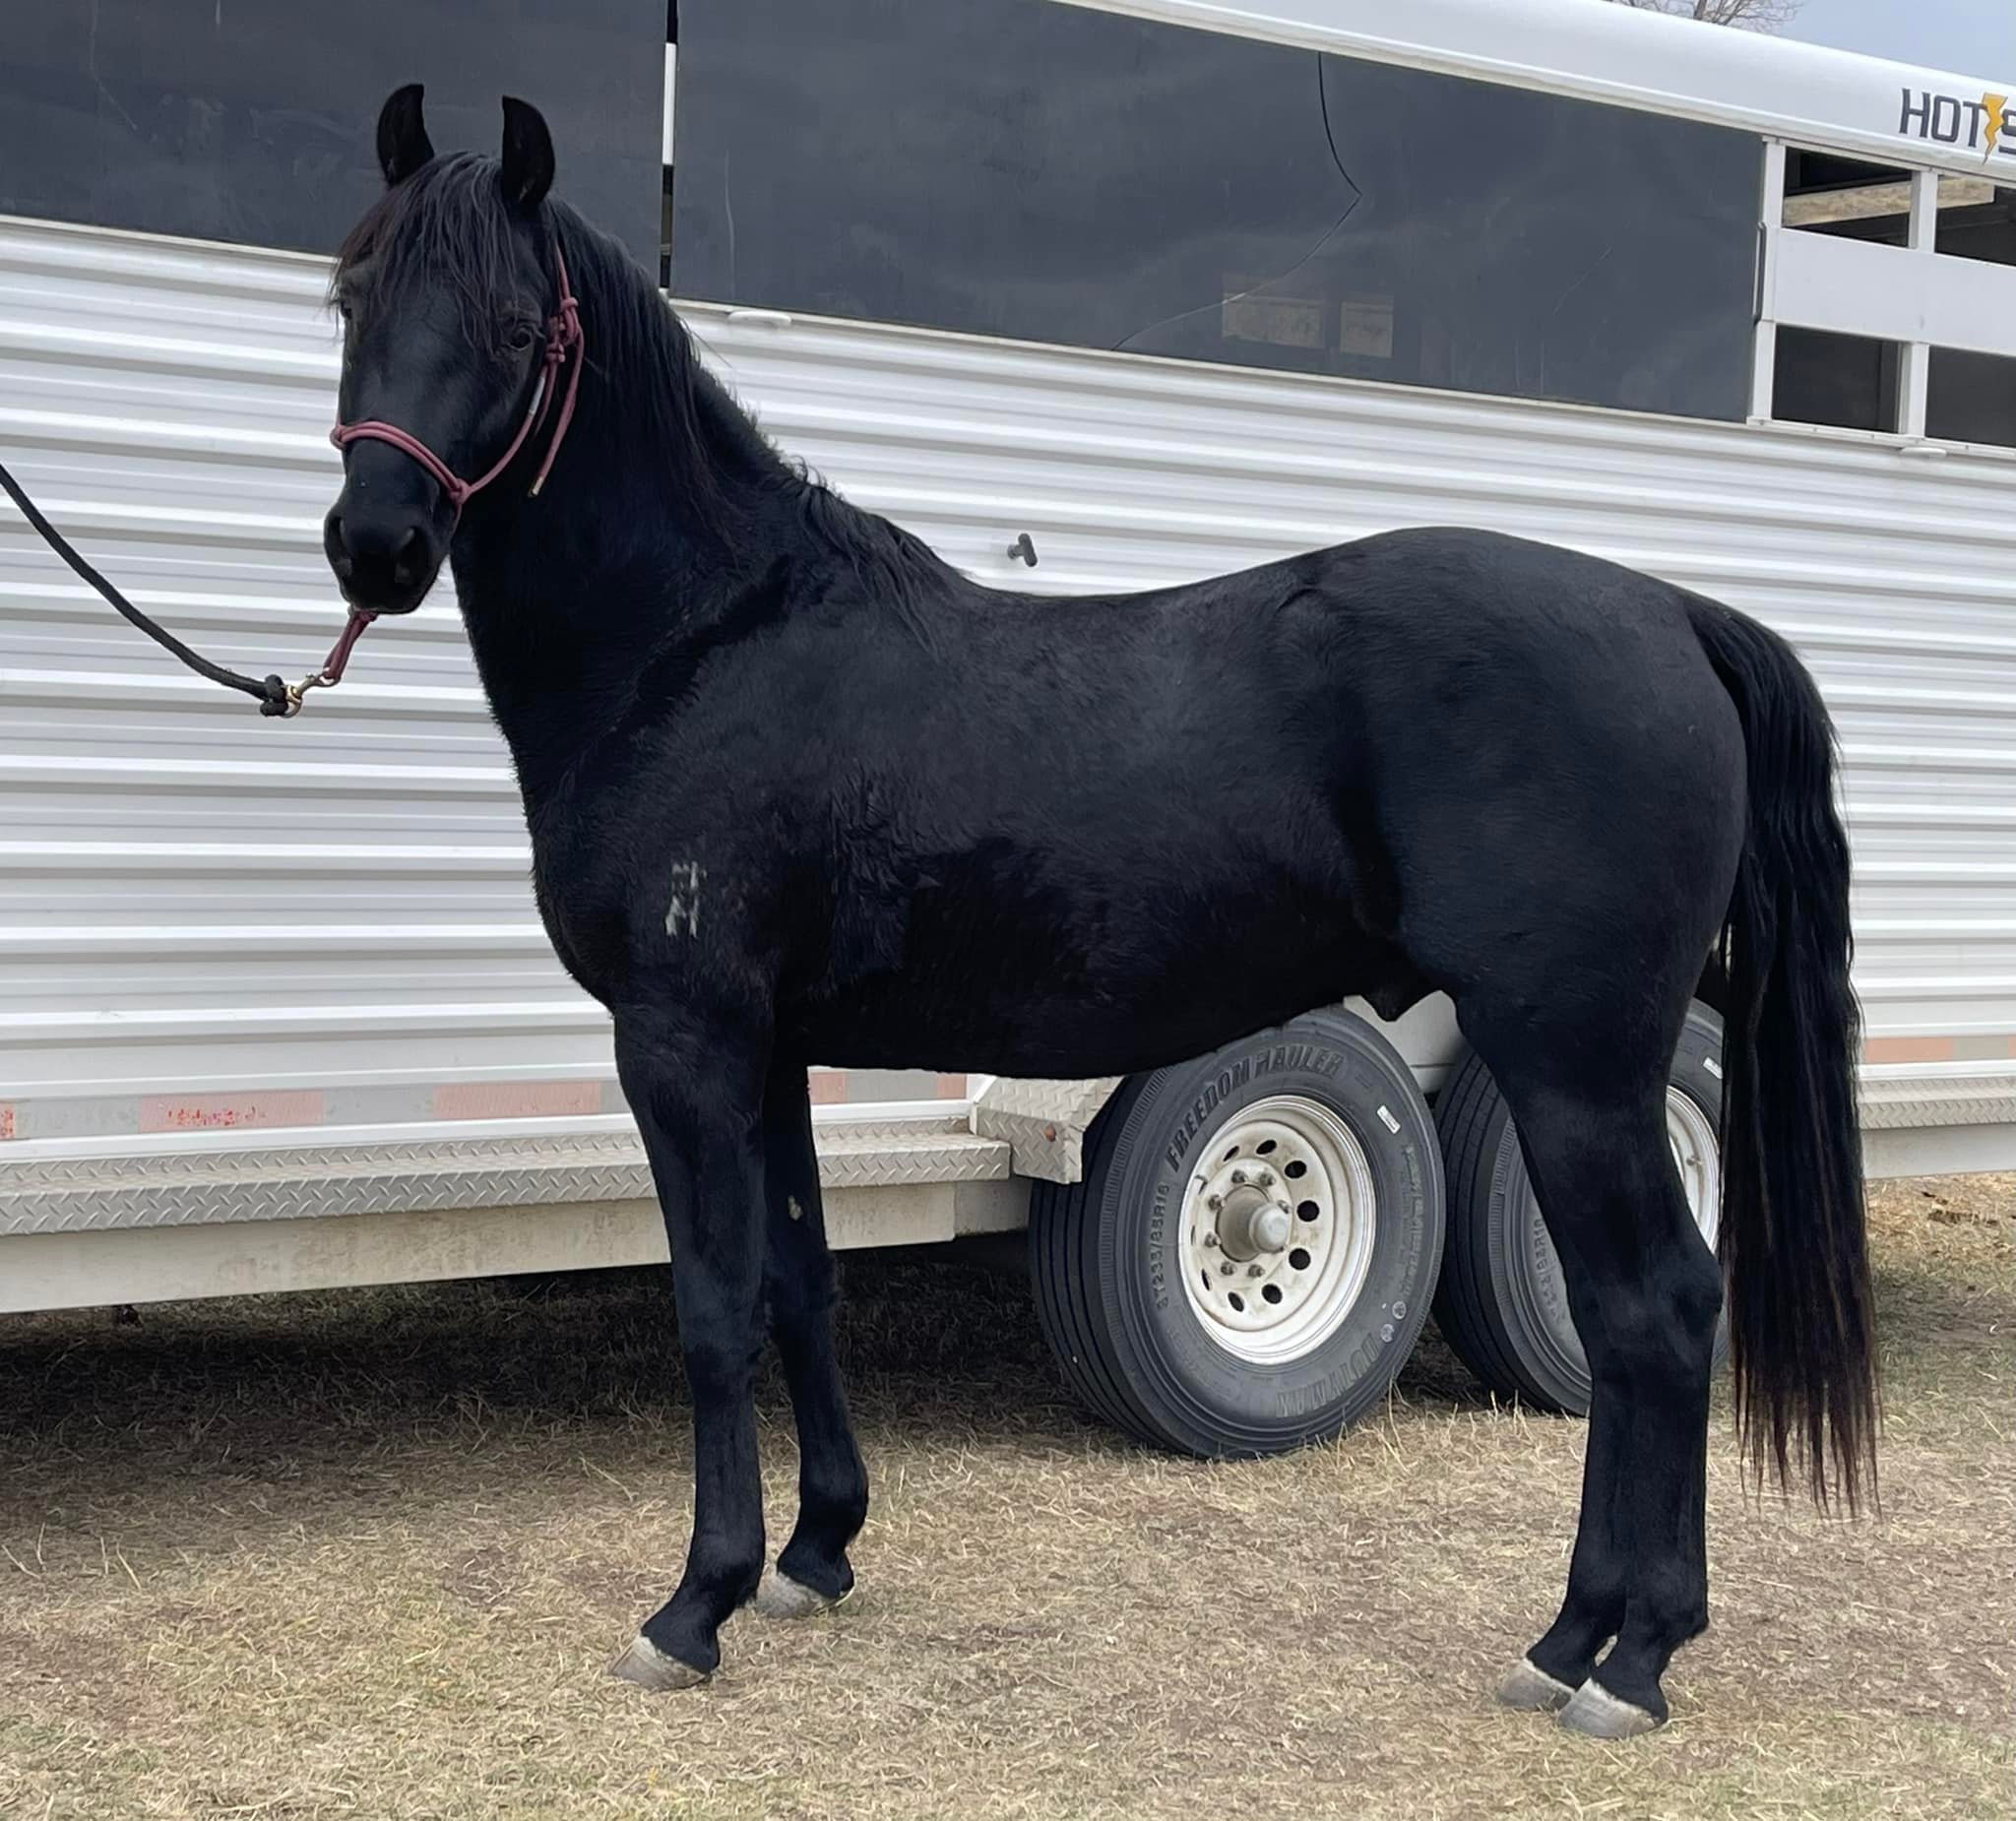 TruWest Smokey Mntn Chief, black Morgan stallion, standing tied to the trailer looking at the photographer.